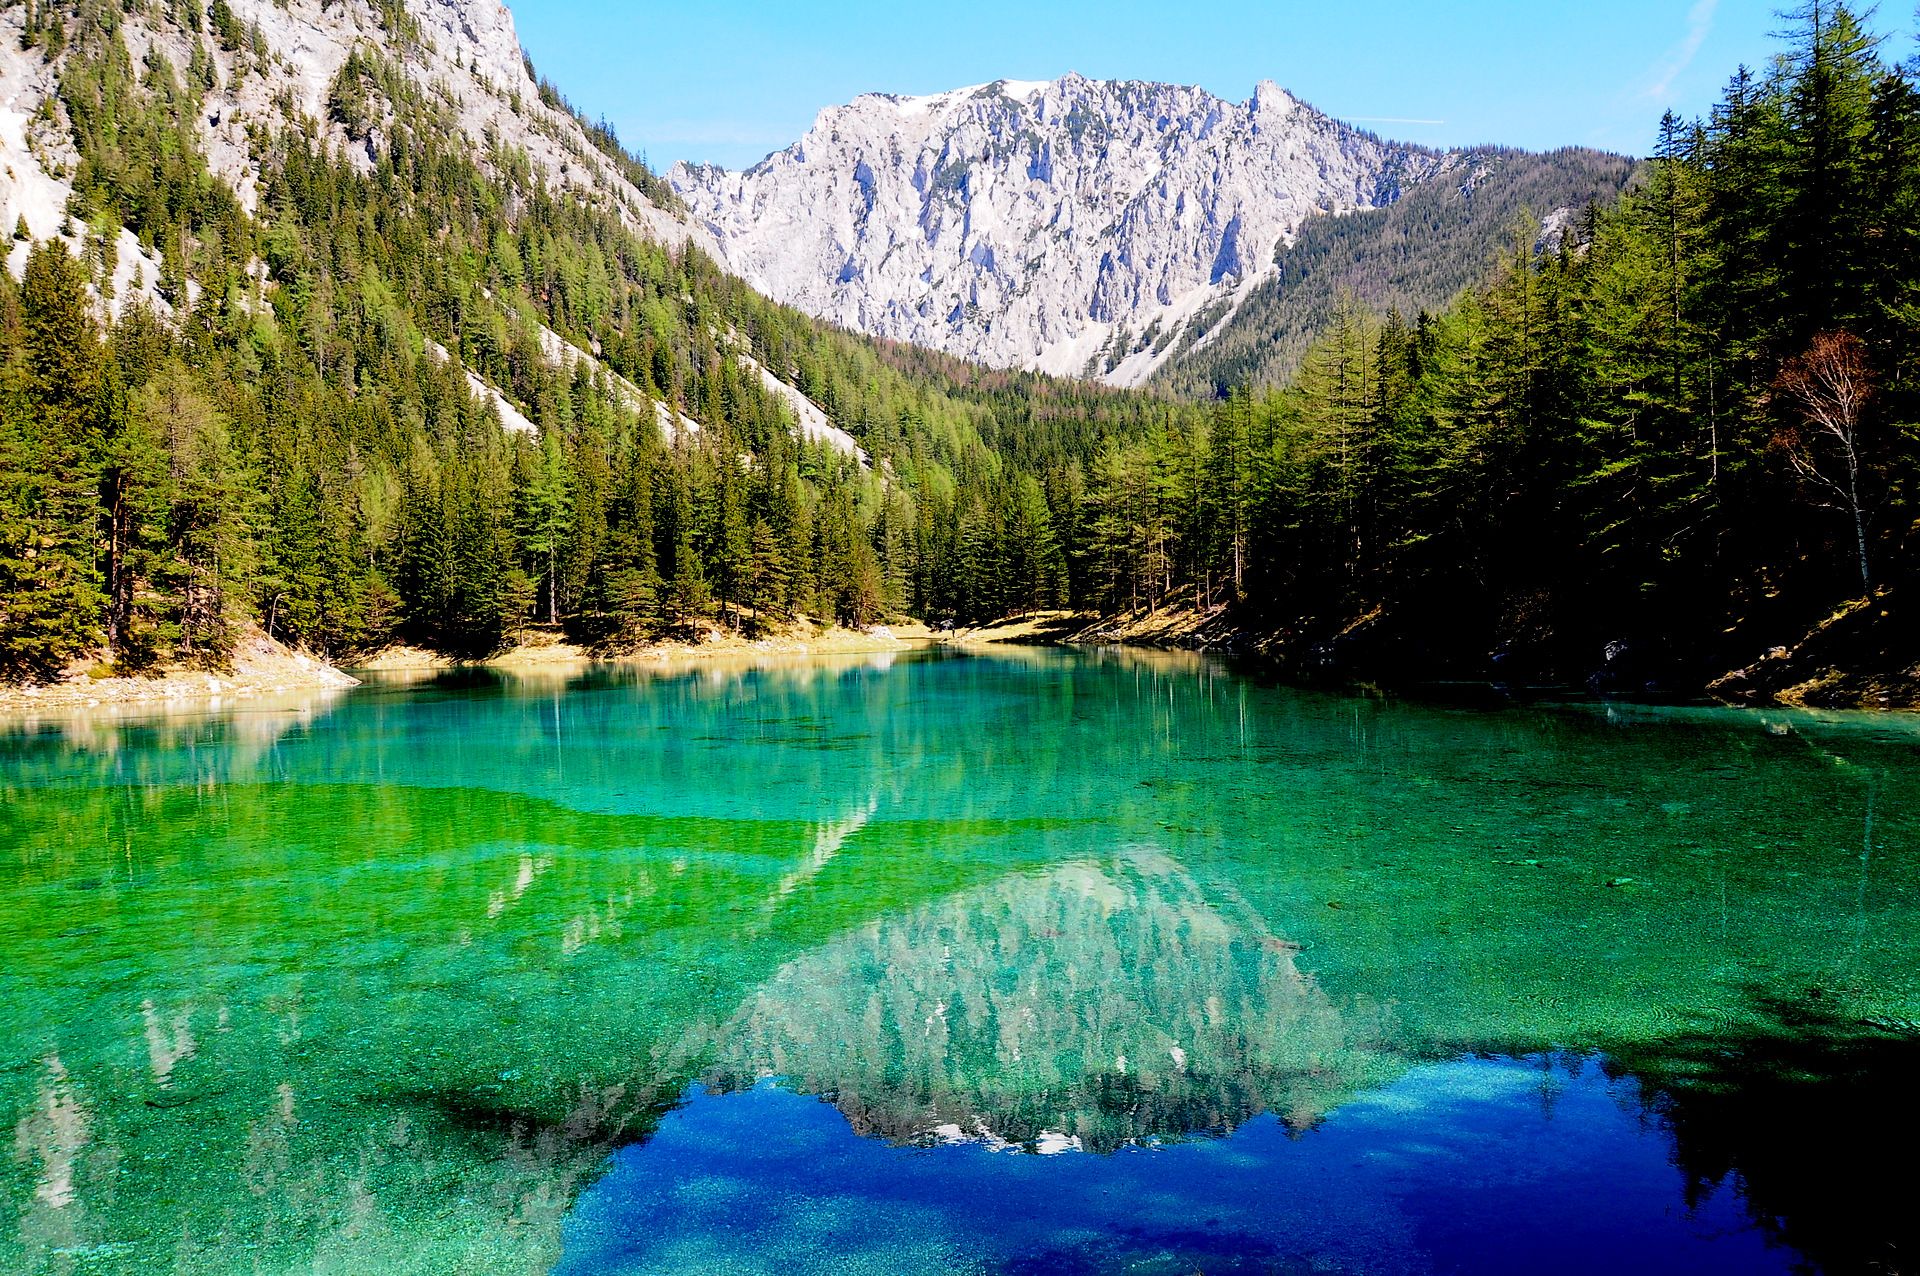 The Green Lake in Tragoess, Austria - Best Underwater Sites on Earth